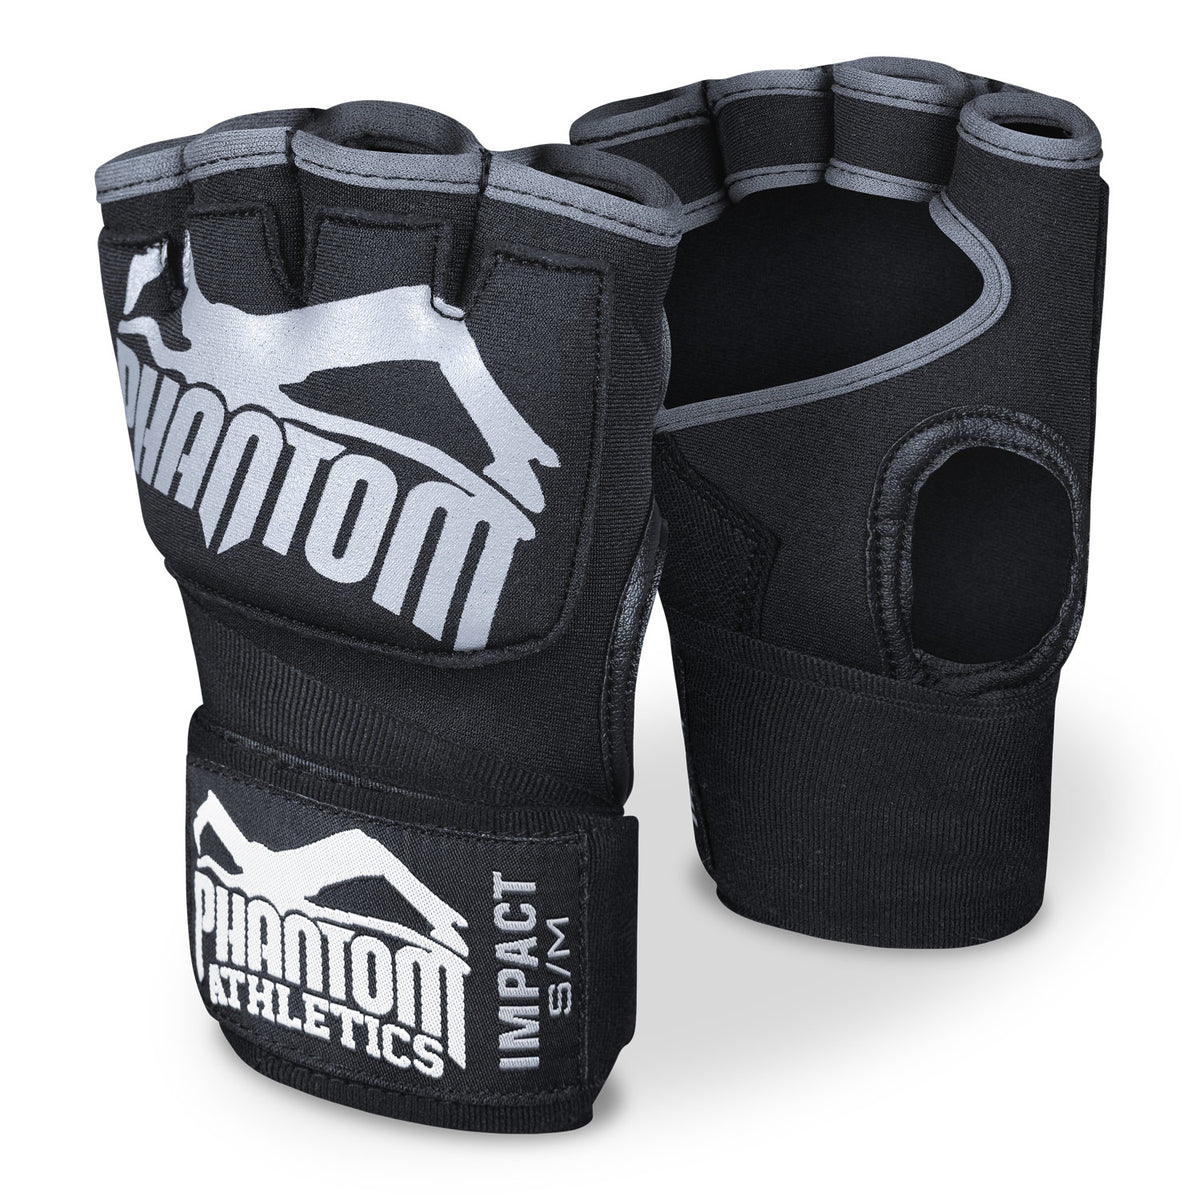 The Phantom boxing bandages Impact with gel filling. For more protection in your martial arts training.